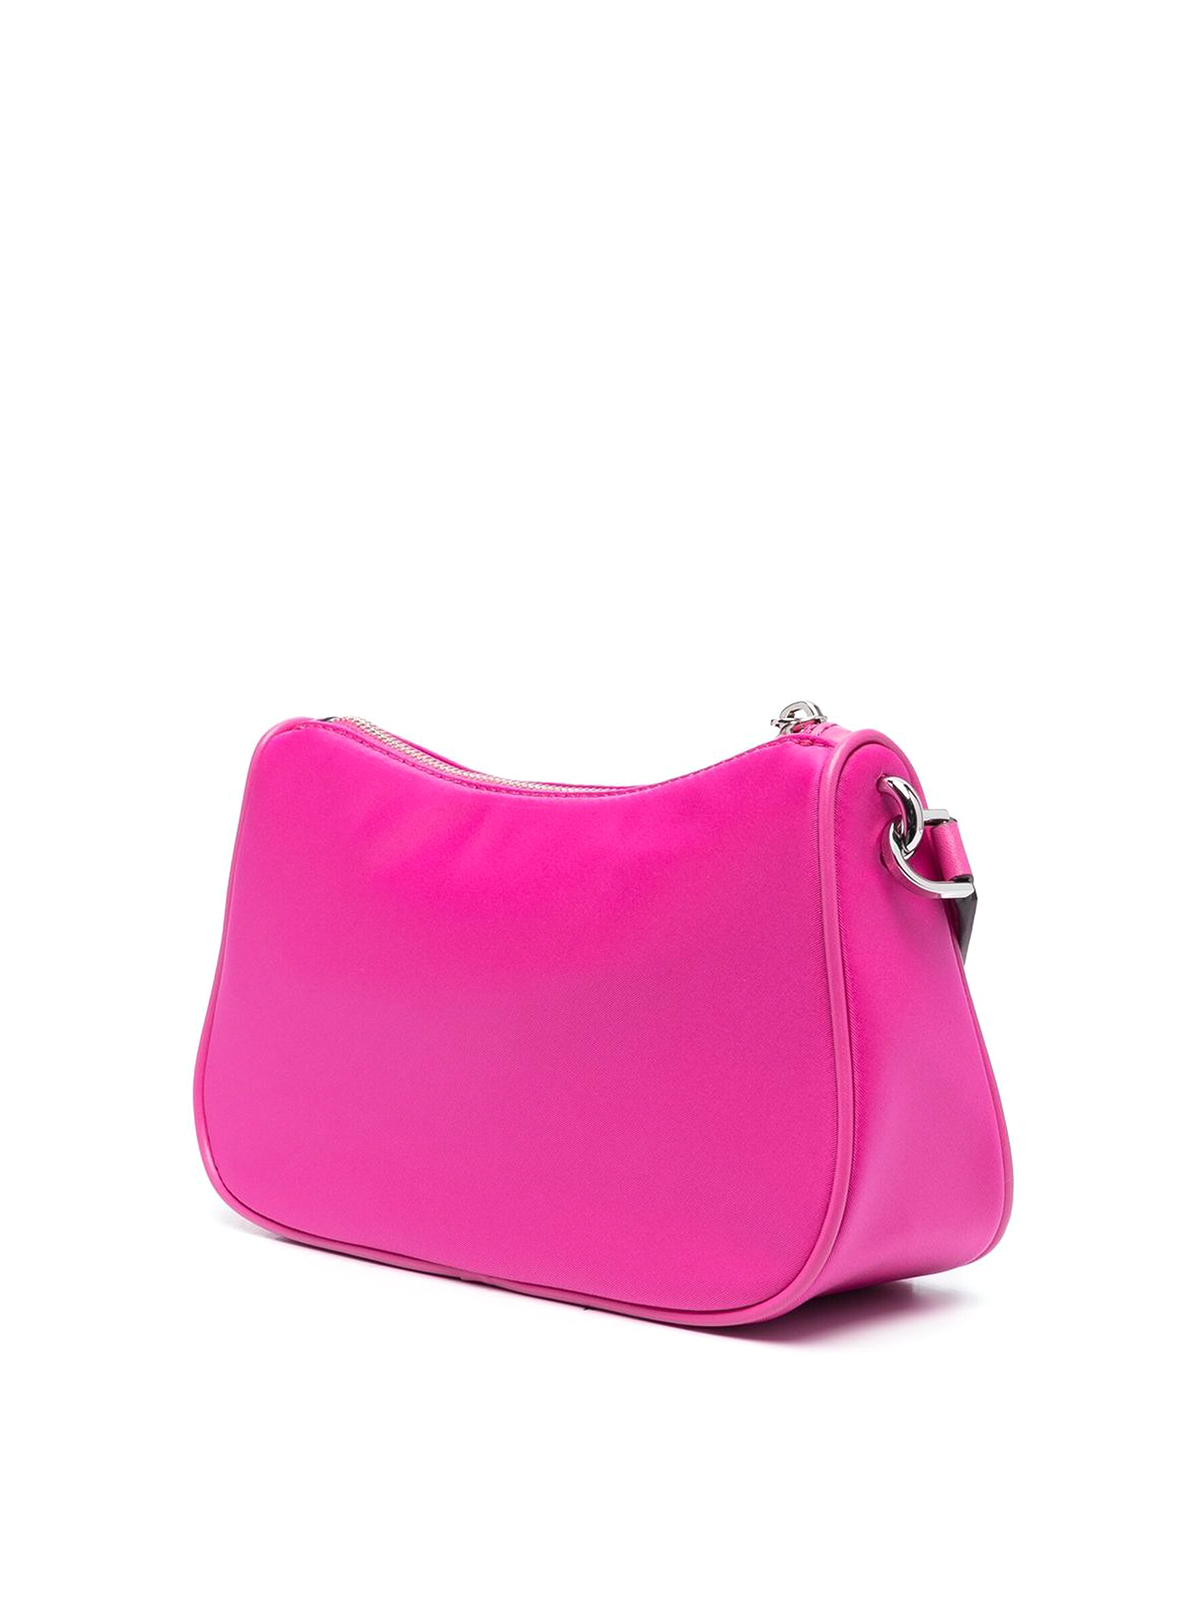 Michael Kors Wallet Pink - $139 (46% Off Retail) New With Tags - From Aya